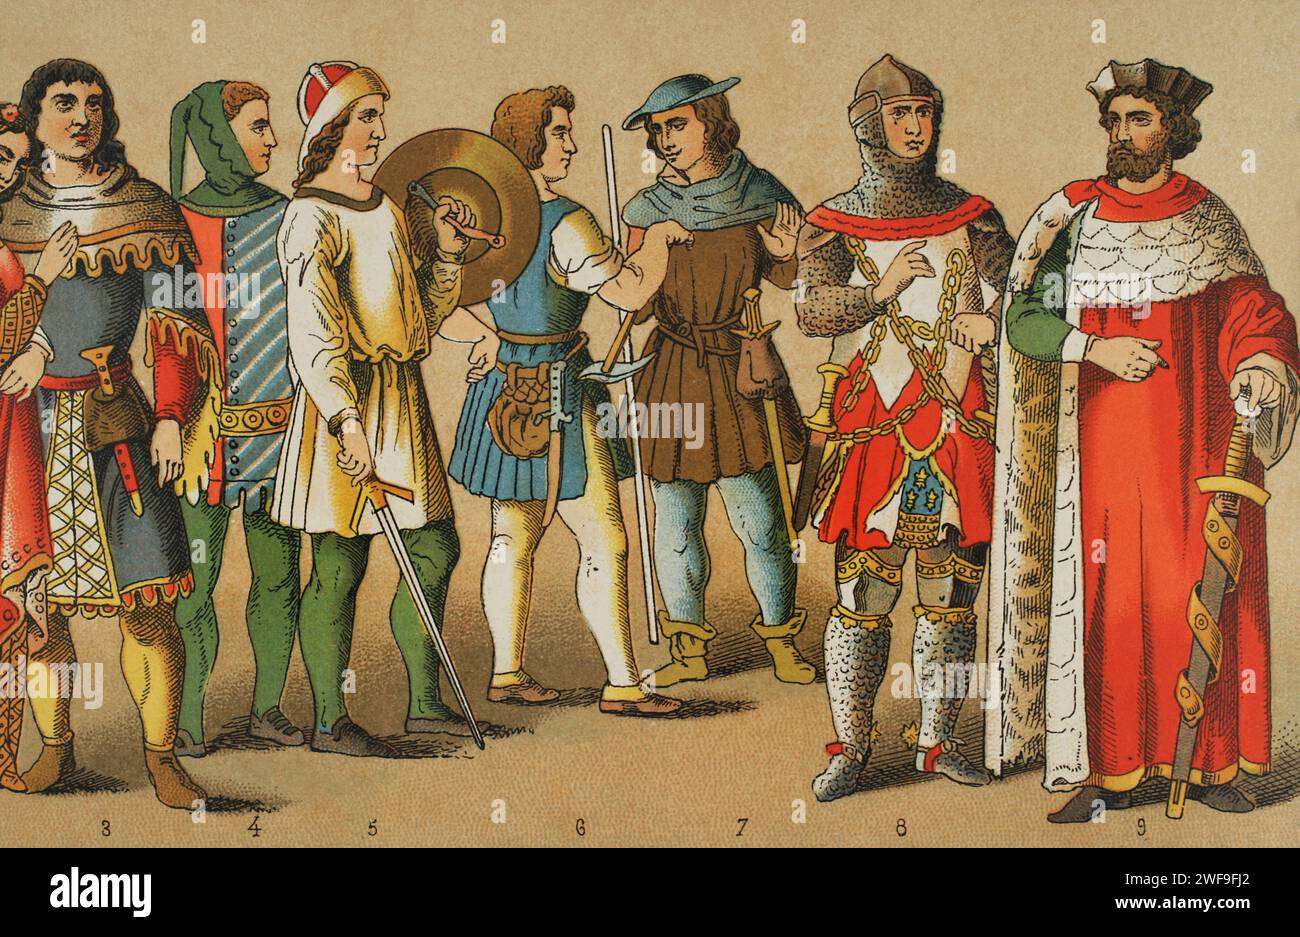 History of Germany. 1300-1350. From left to right, 3-4: noblemen, 5: armed citizen, 6-7: menestrals, 8: knight, 9: Landgrave of Thuringia. Chromolithography. 'Historia Universal', by César Cantú. Volume VI, 1885. Stock Photo